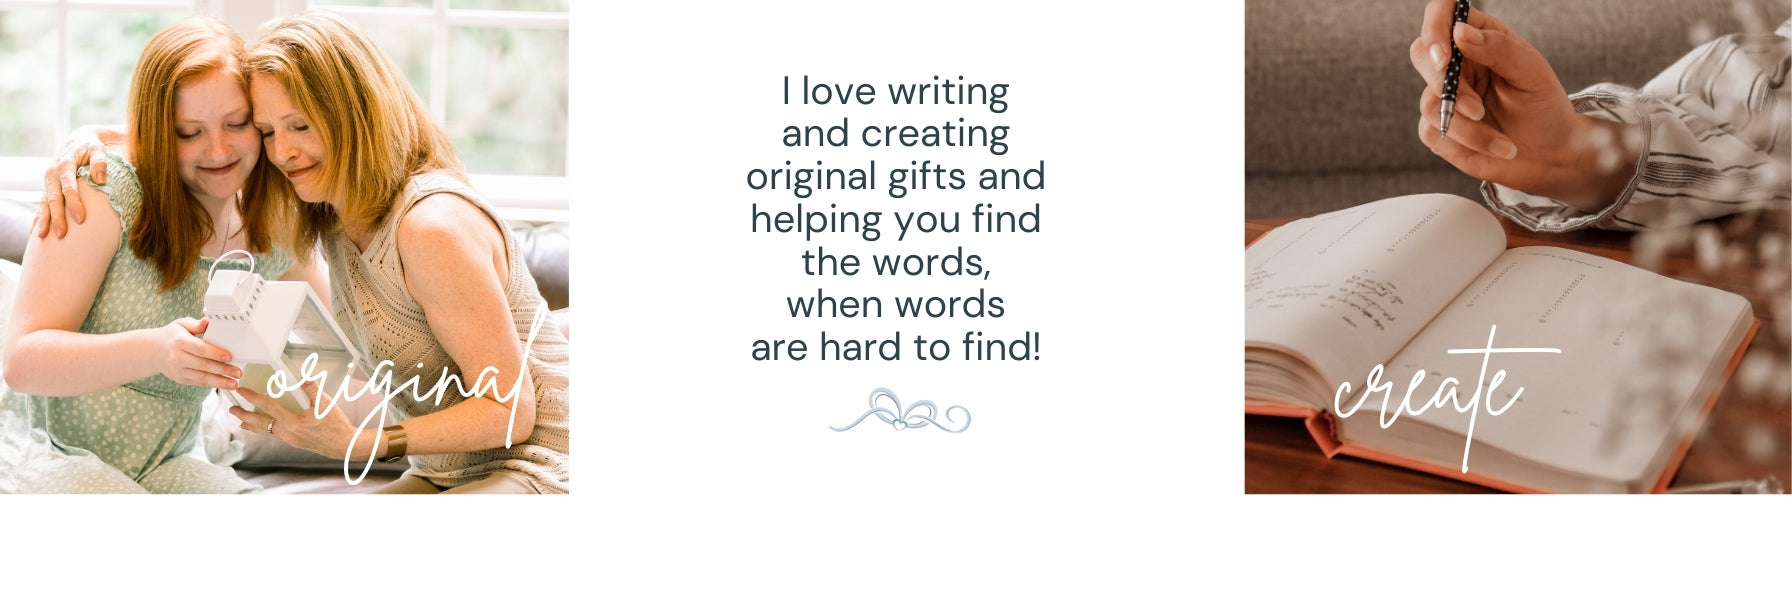 I love writing and creating original gifts and helping you find the words when words are hard to find!